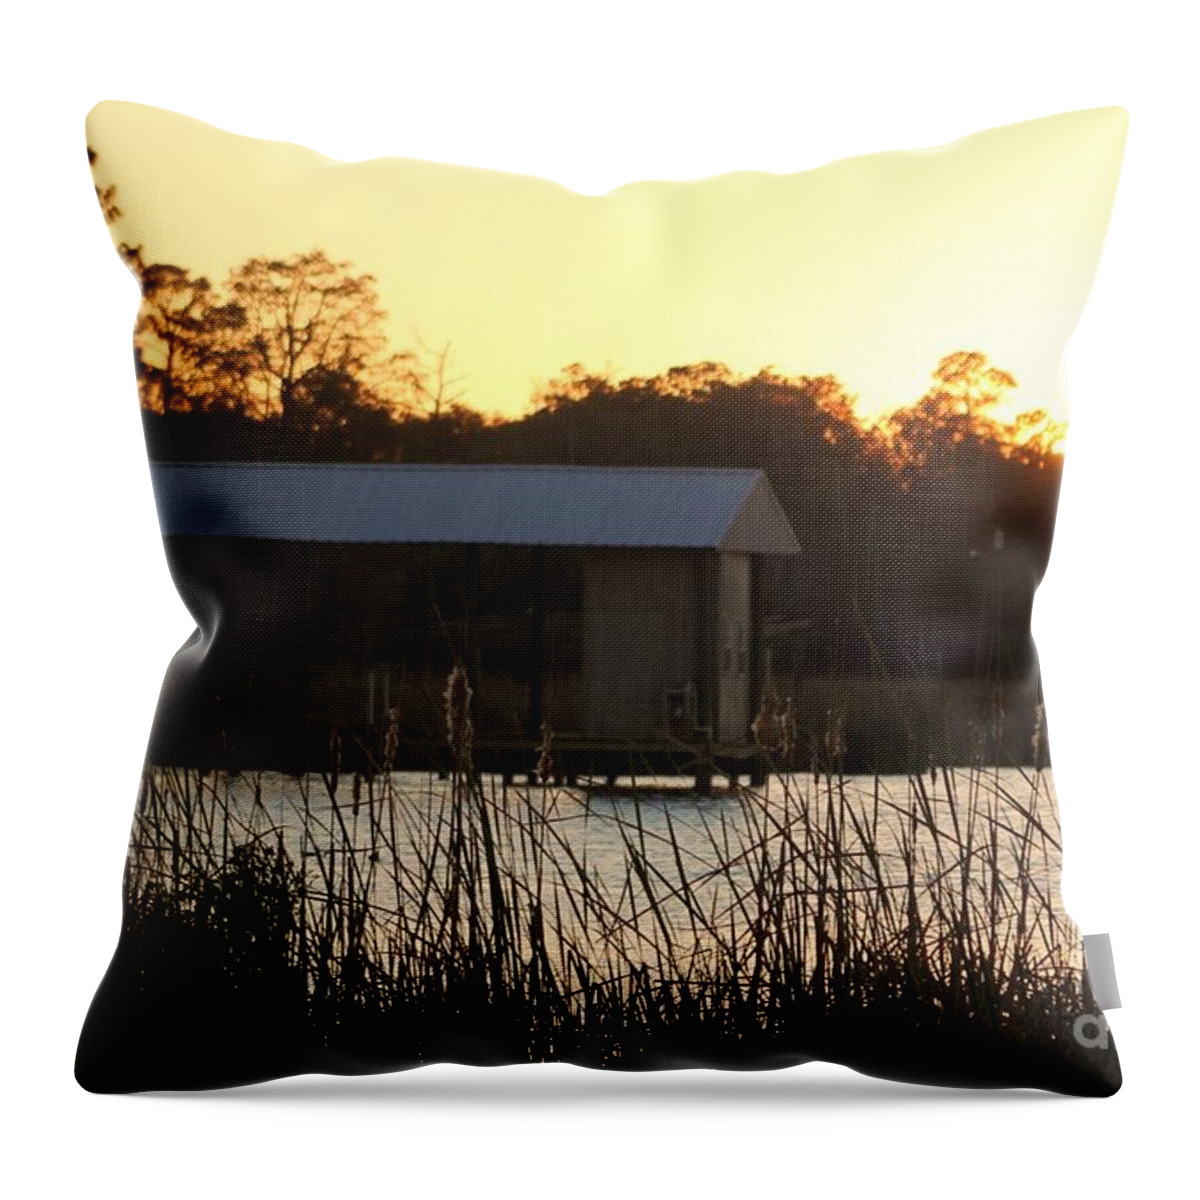 Mississippi Throw Pillow featuring the photograph Mississippi Bayou 10 by Michelle Powell